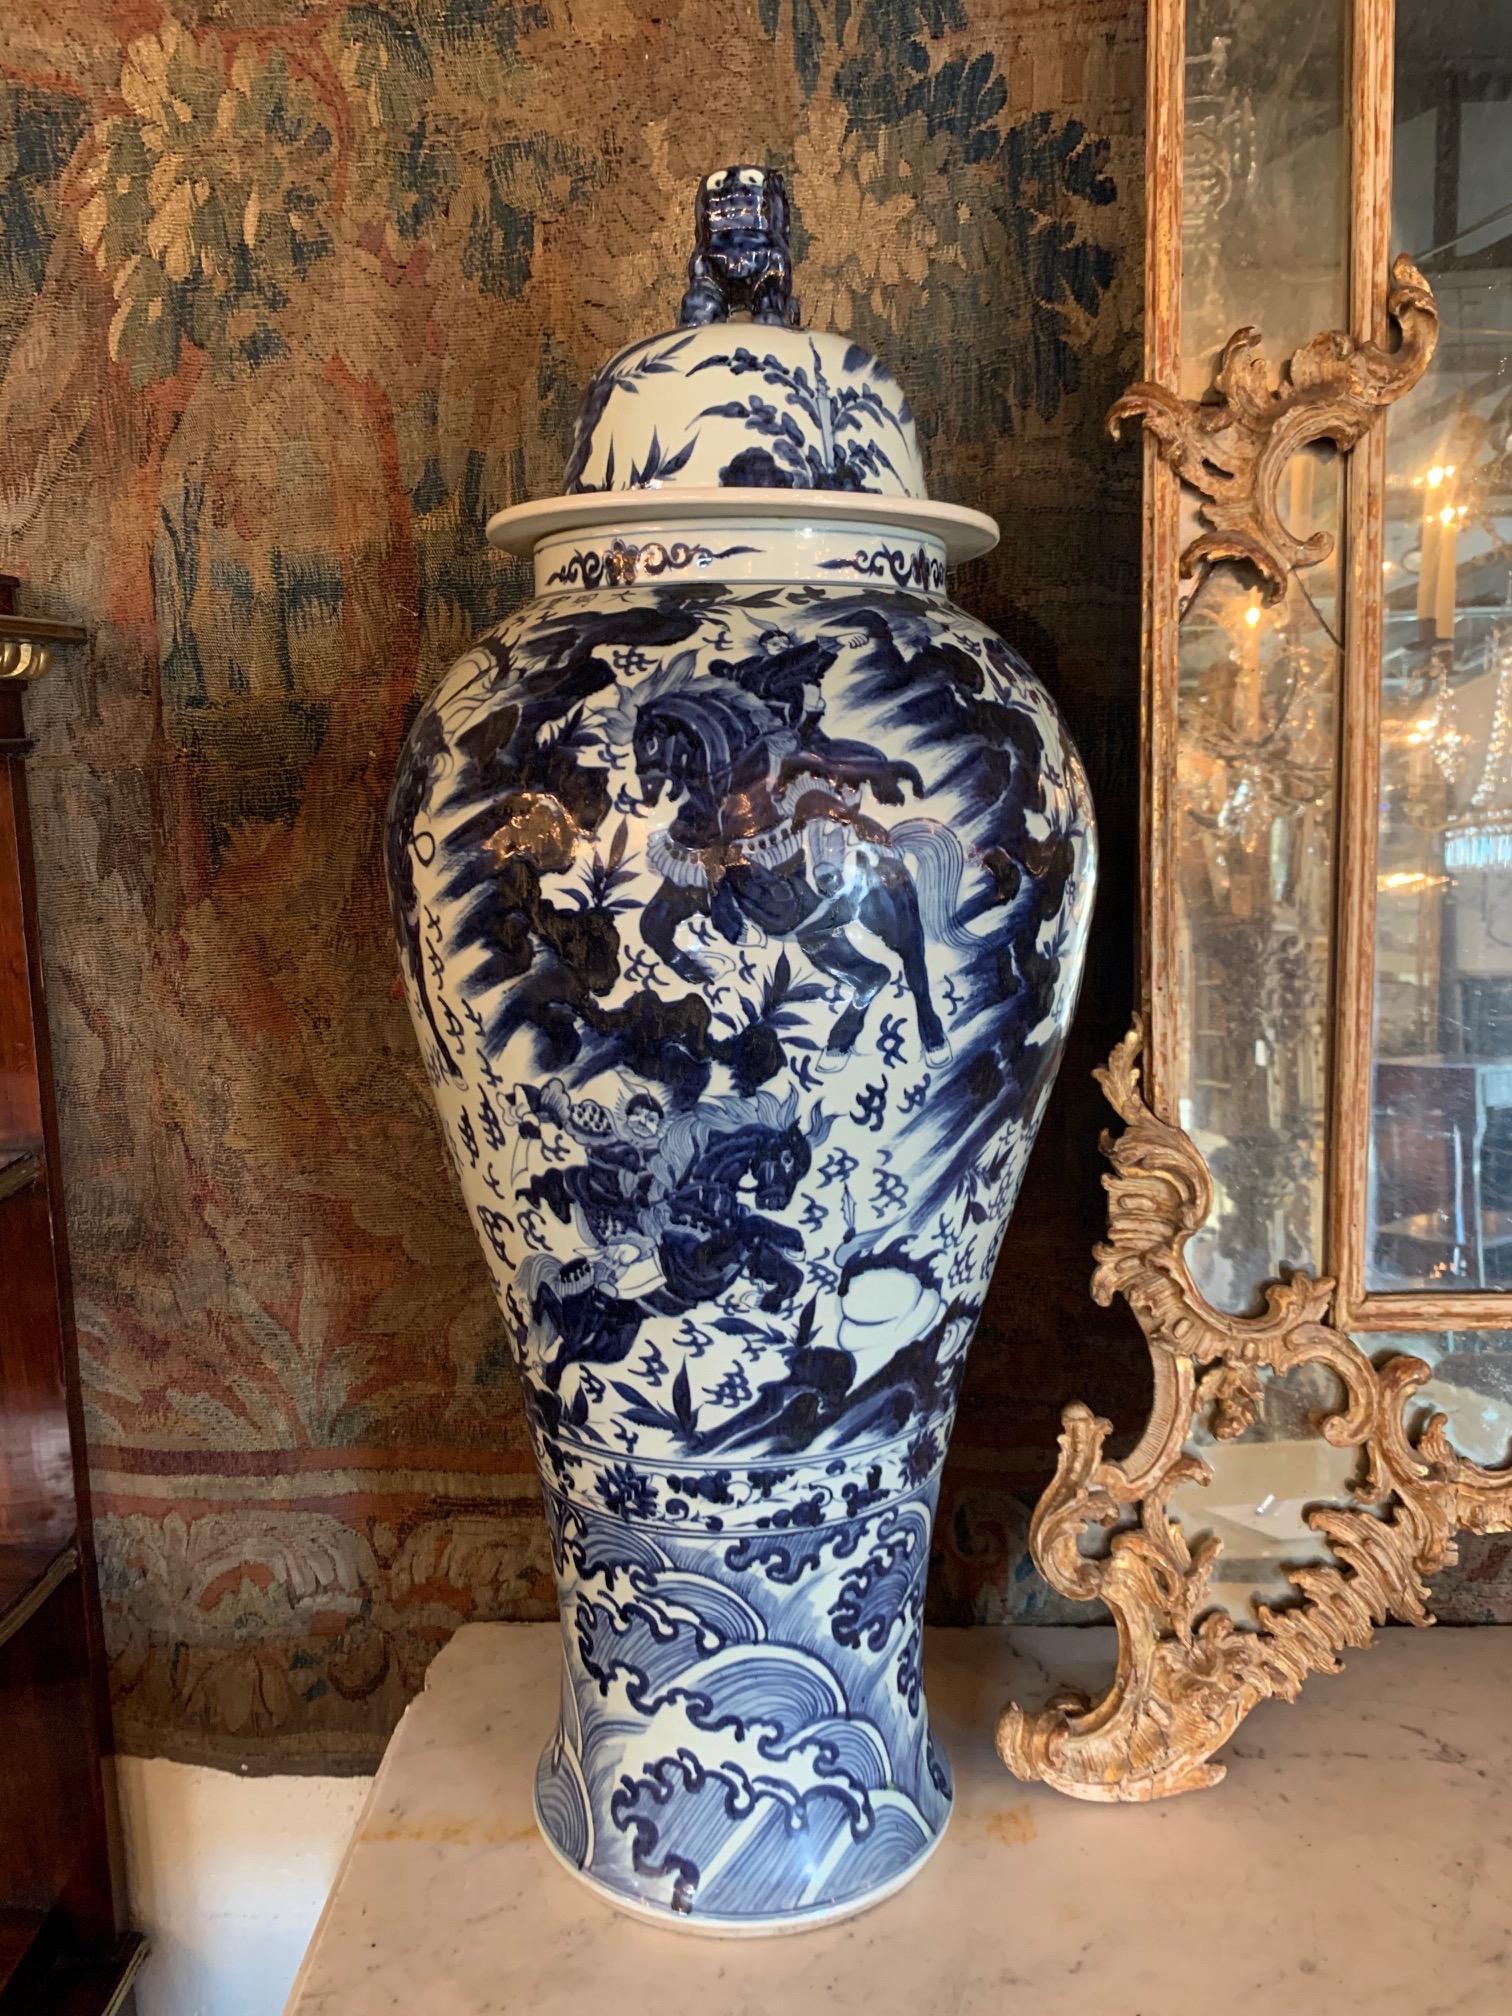 Exquisite pair of large scale blue and white lidded Chinese vases. Interesting images of a men on horseback. These are exceptional!